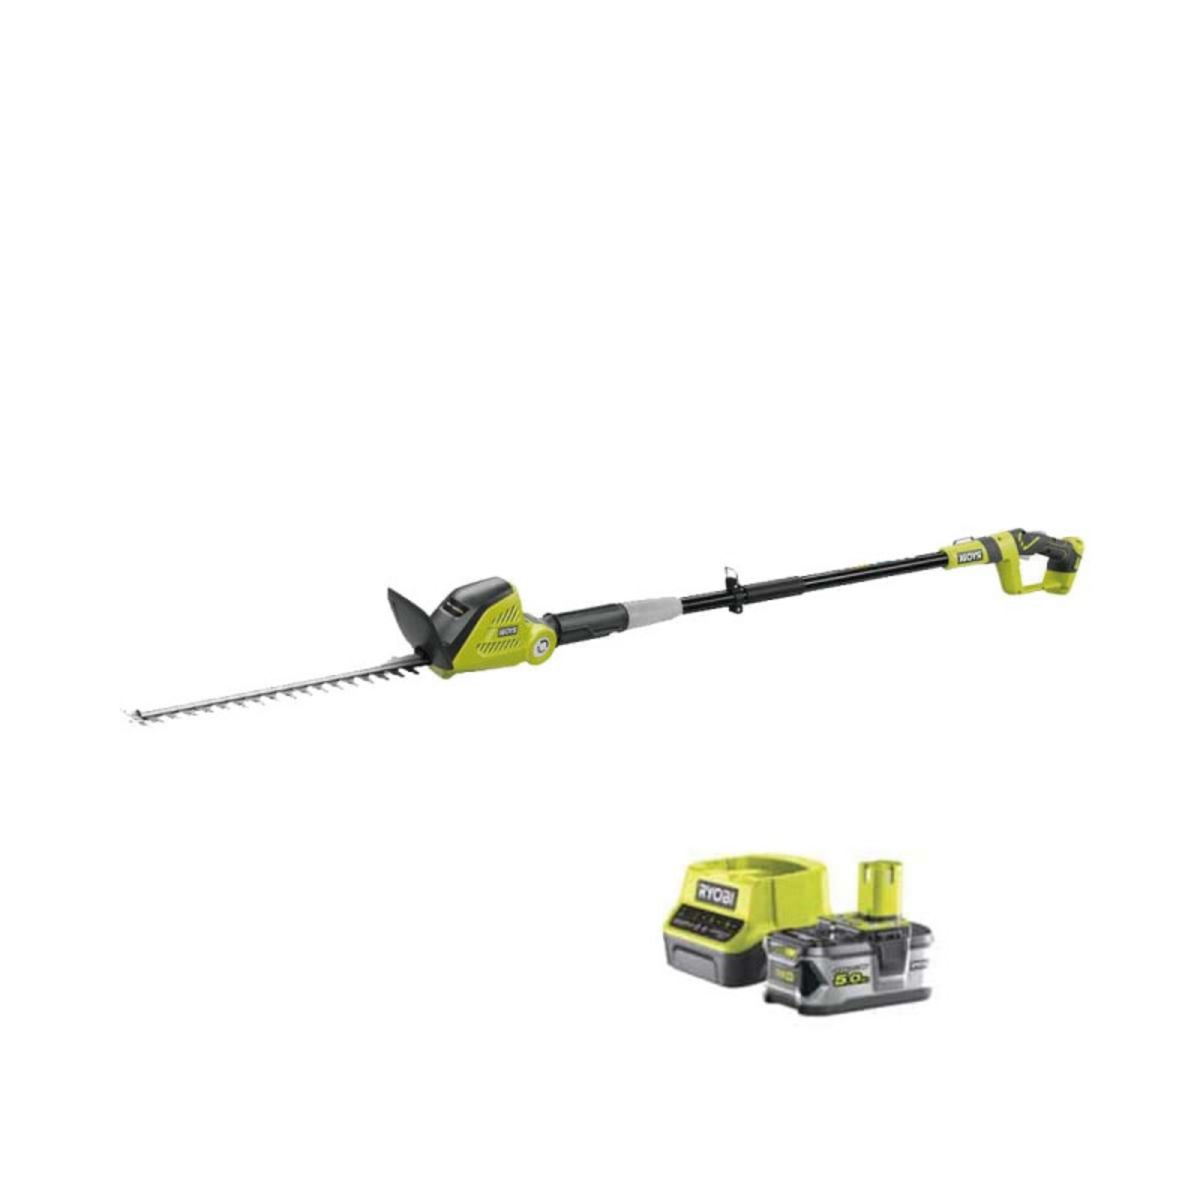 Ryobi Pack RYOBI taille-haies 18V OnePlus OPT1845 - 1 batterie 5.0Ah - 1 chargeur rapide 2.0Ah RC18120-150